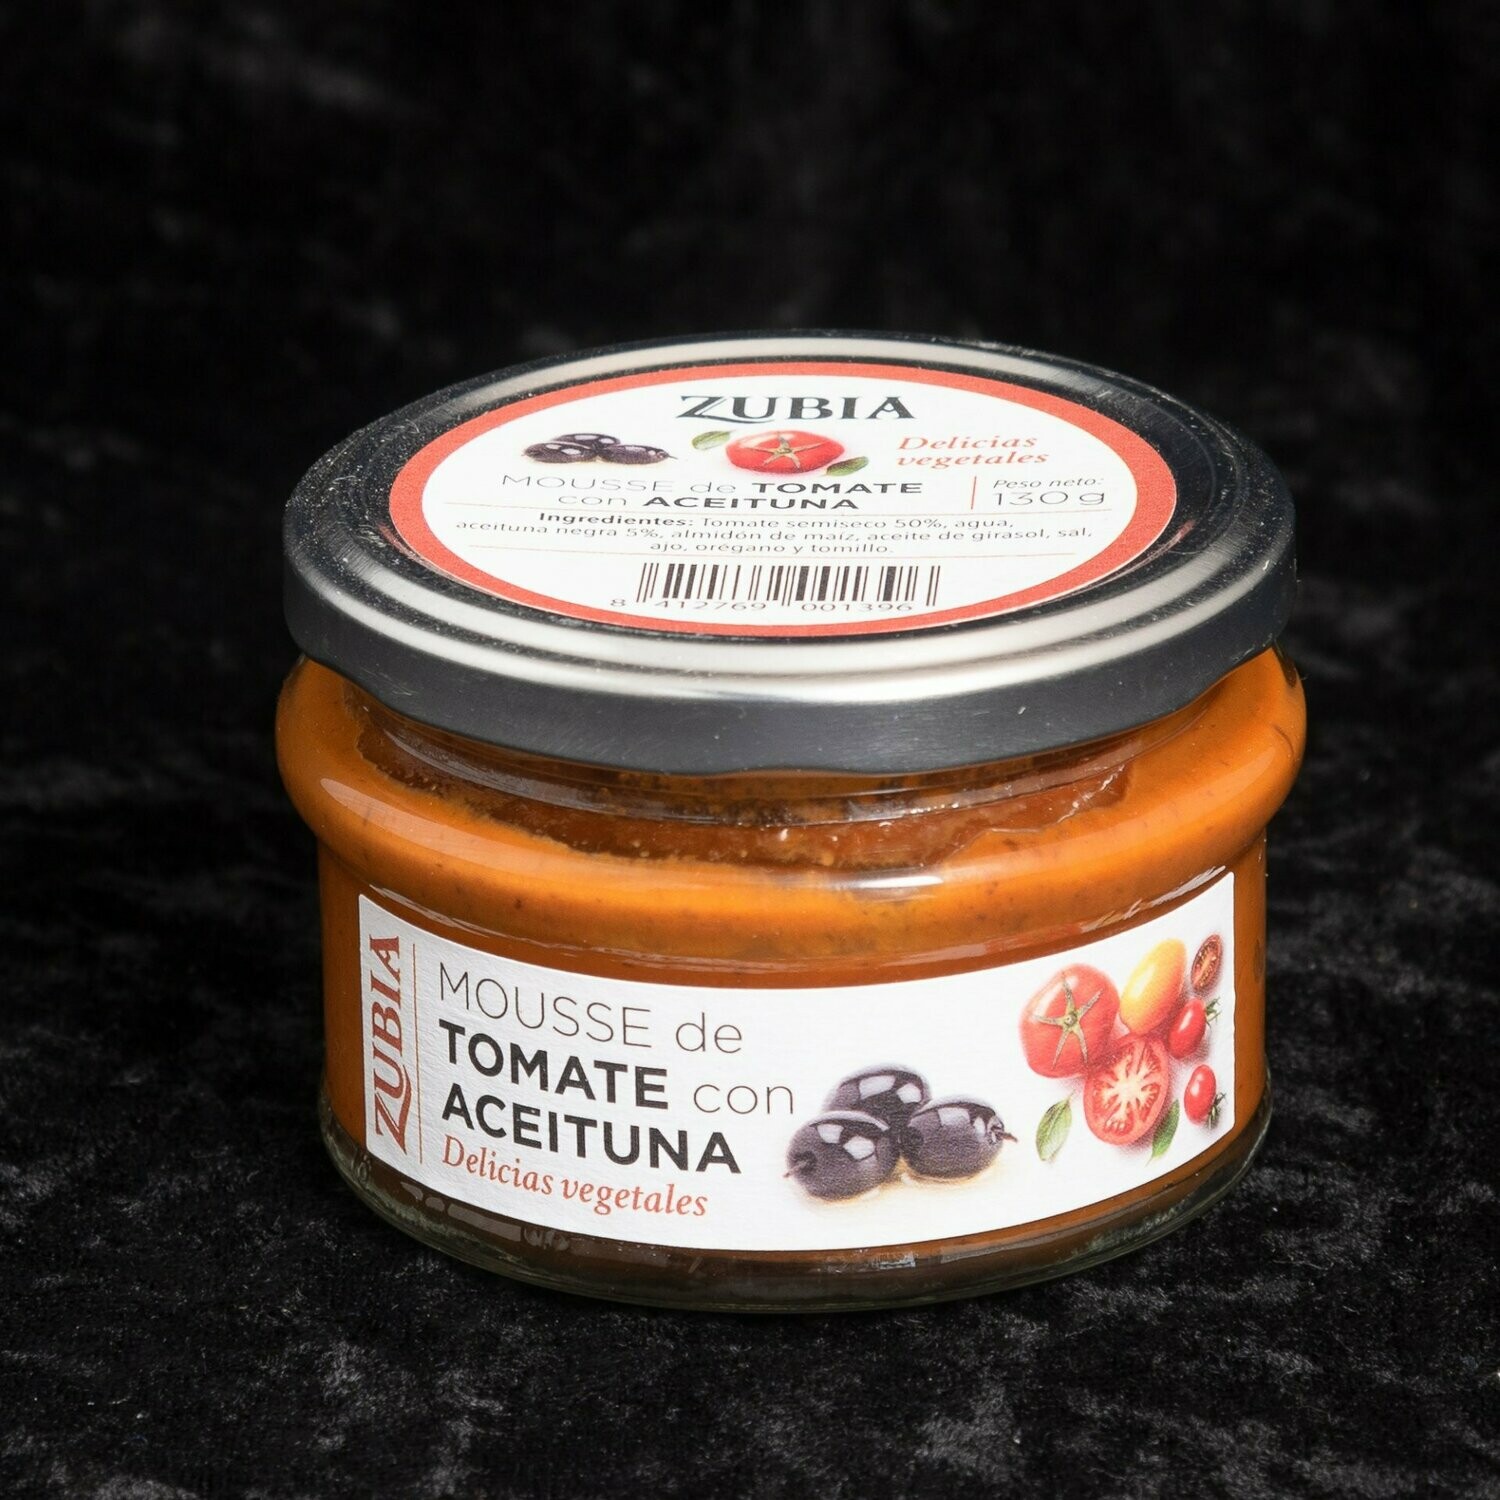 Tomato and Olive mousse, Zubia (130 g)